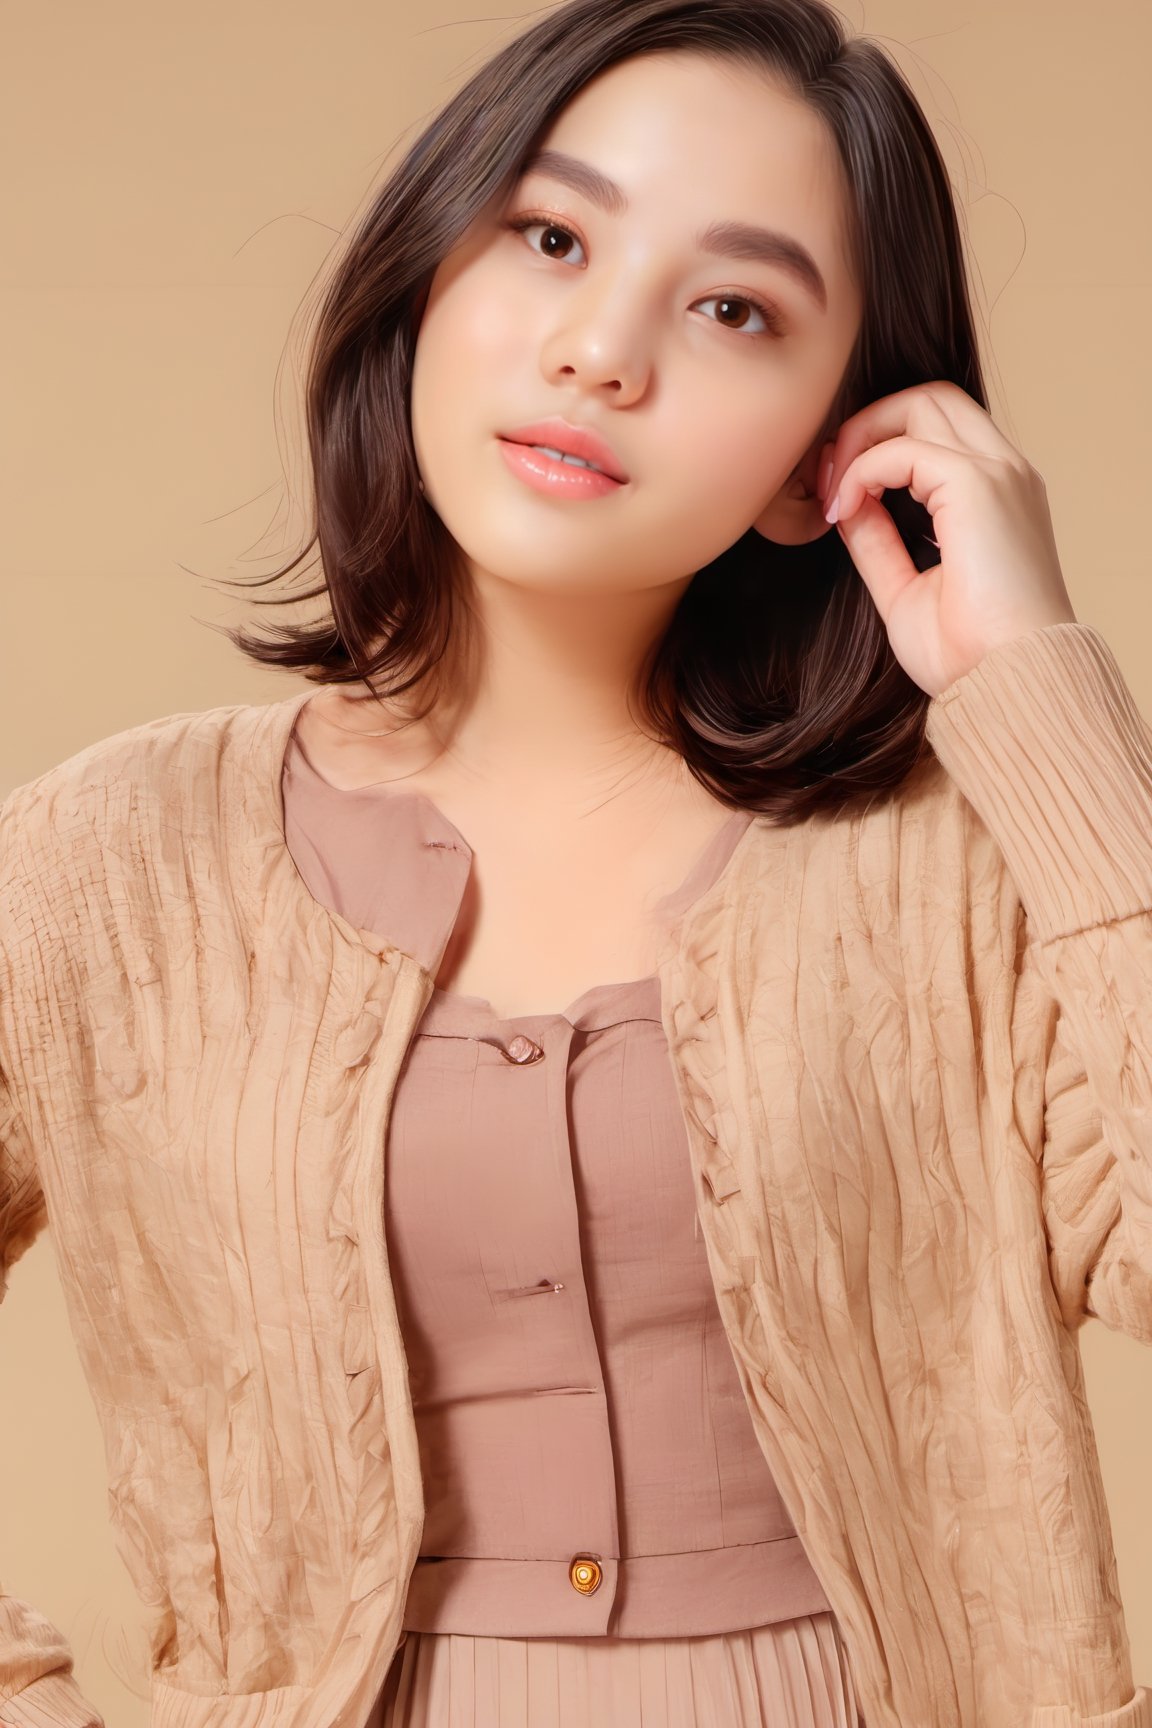 (masterpiece, best quality, photorealistic), 1girl, black hair, (brown eyes), small boobs, 
detailed skin, pore, lovely expression, close mouth, 
school uniform, cardigan, bra top, (upper body:0.7), 
beauty model, beige plain background, Detailedface, 
Realism, Epic ,Female, Portrait, Raw photo, Photography, Photorealism,
SGBB,alluring_lolita_girl,Young beauty spirit ,little_cute_girl,
from below,DonMB4nsh33XL ,kleedef,Apoloniasxmasbox,ch3ls3a,Ivi